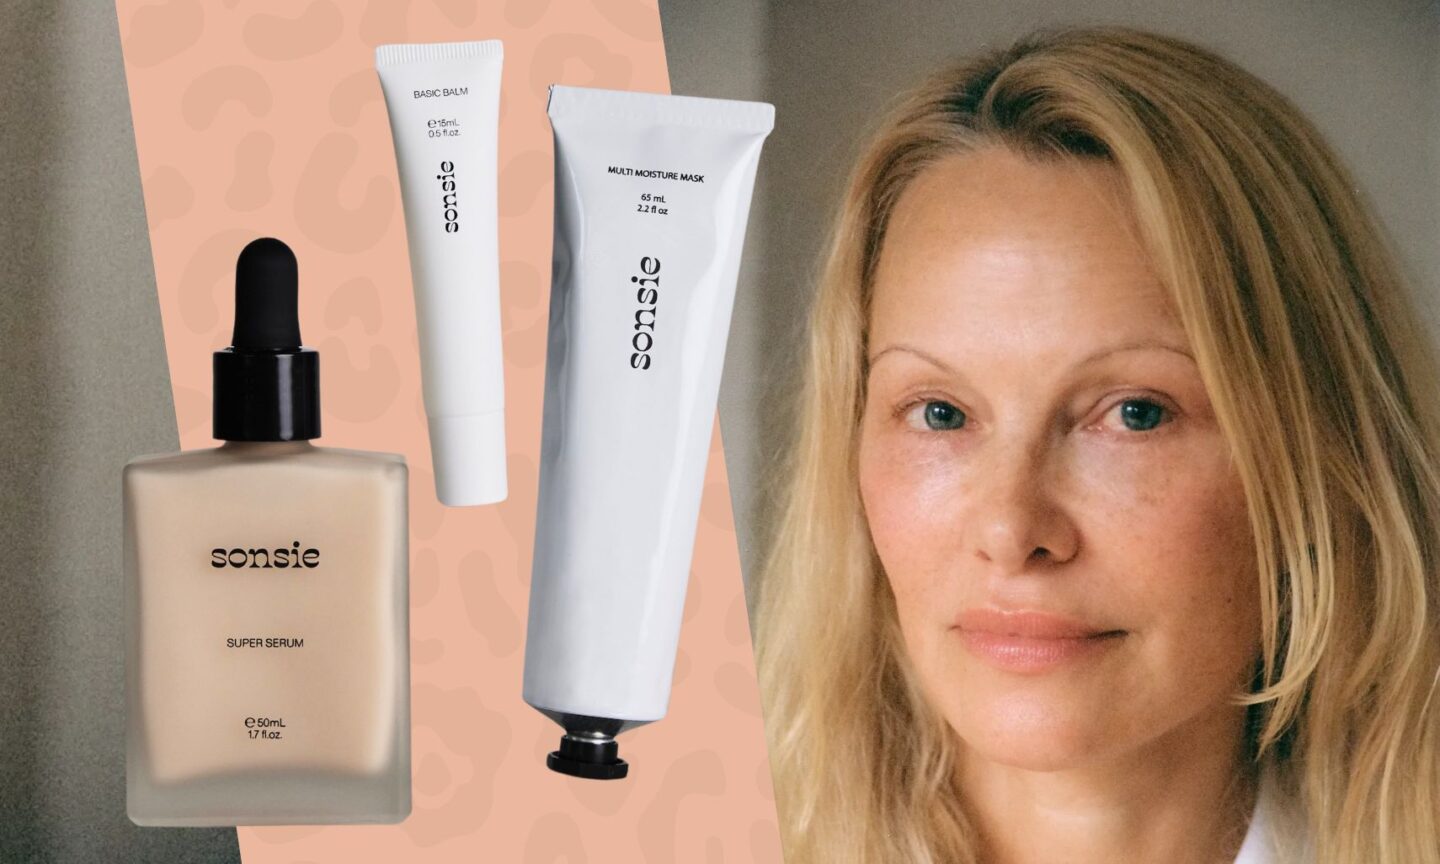 Pamela Anderson next to Sonsie skincare products